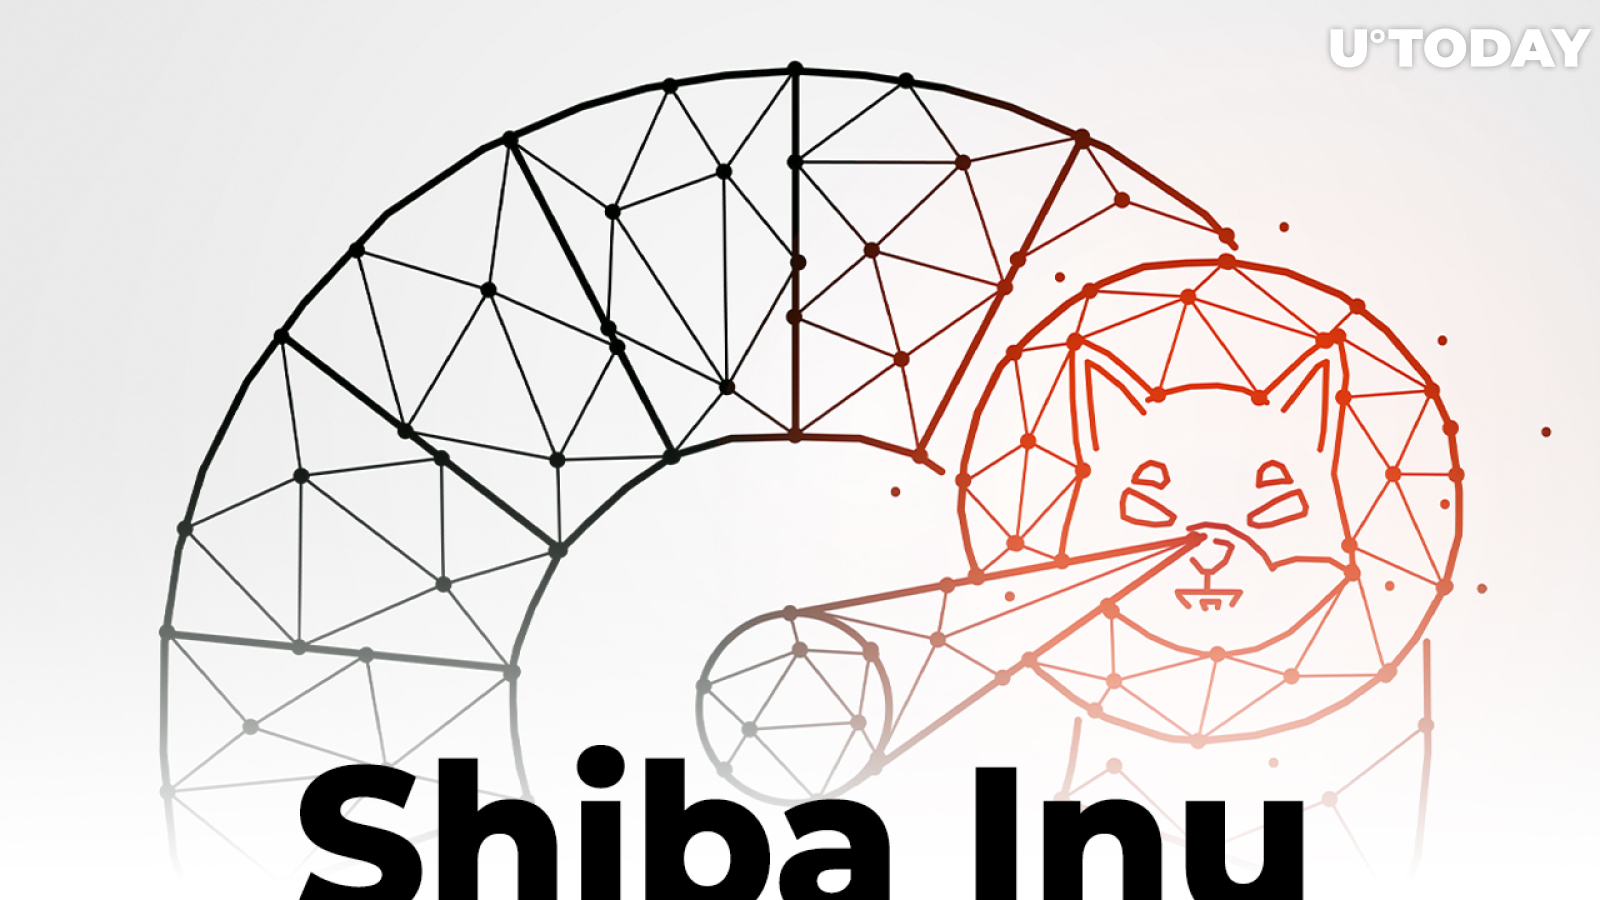 Shiba Inu Network Activity Drops to Summer Levels